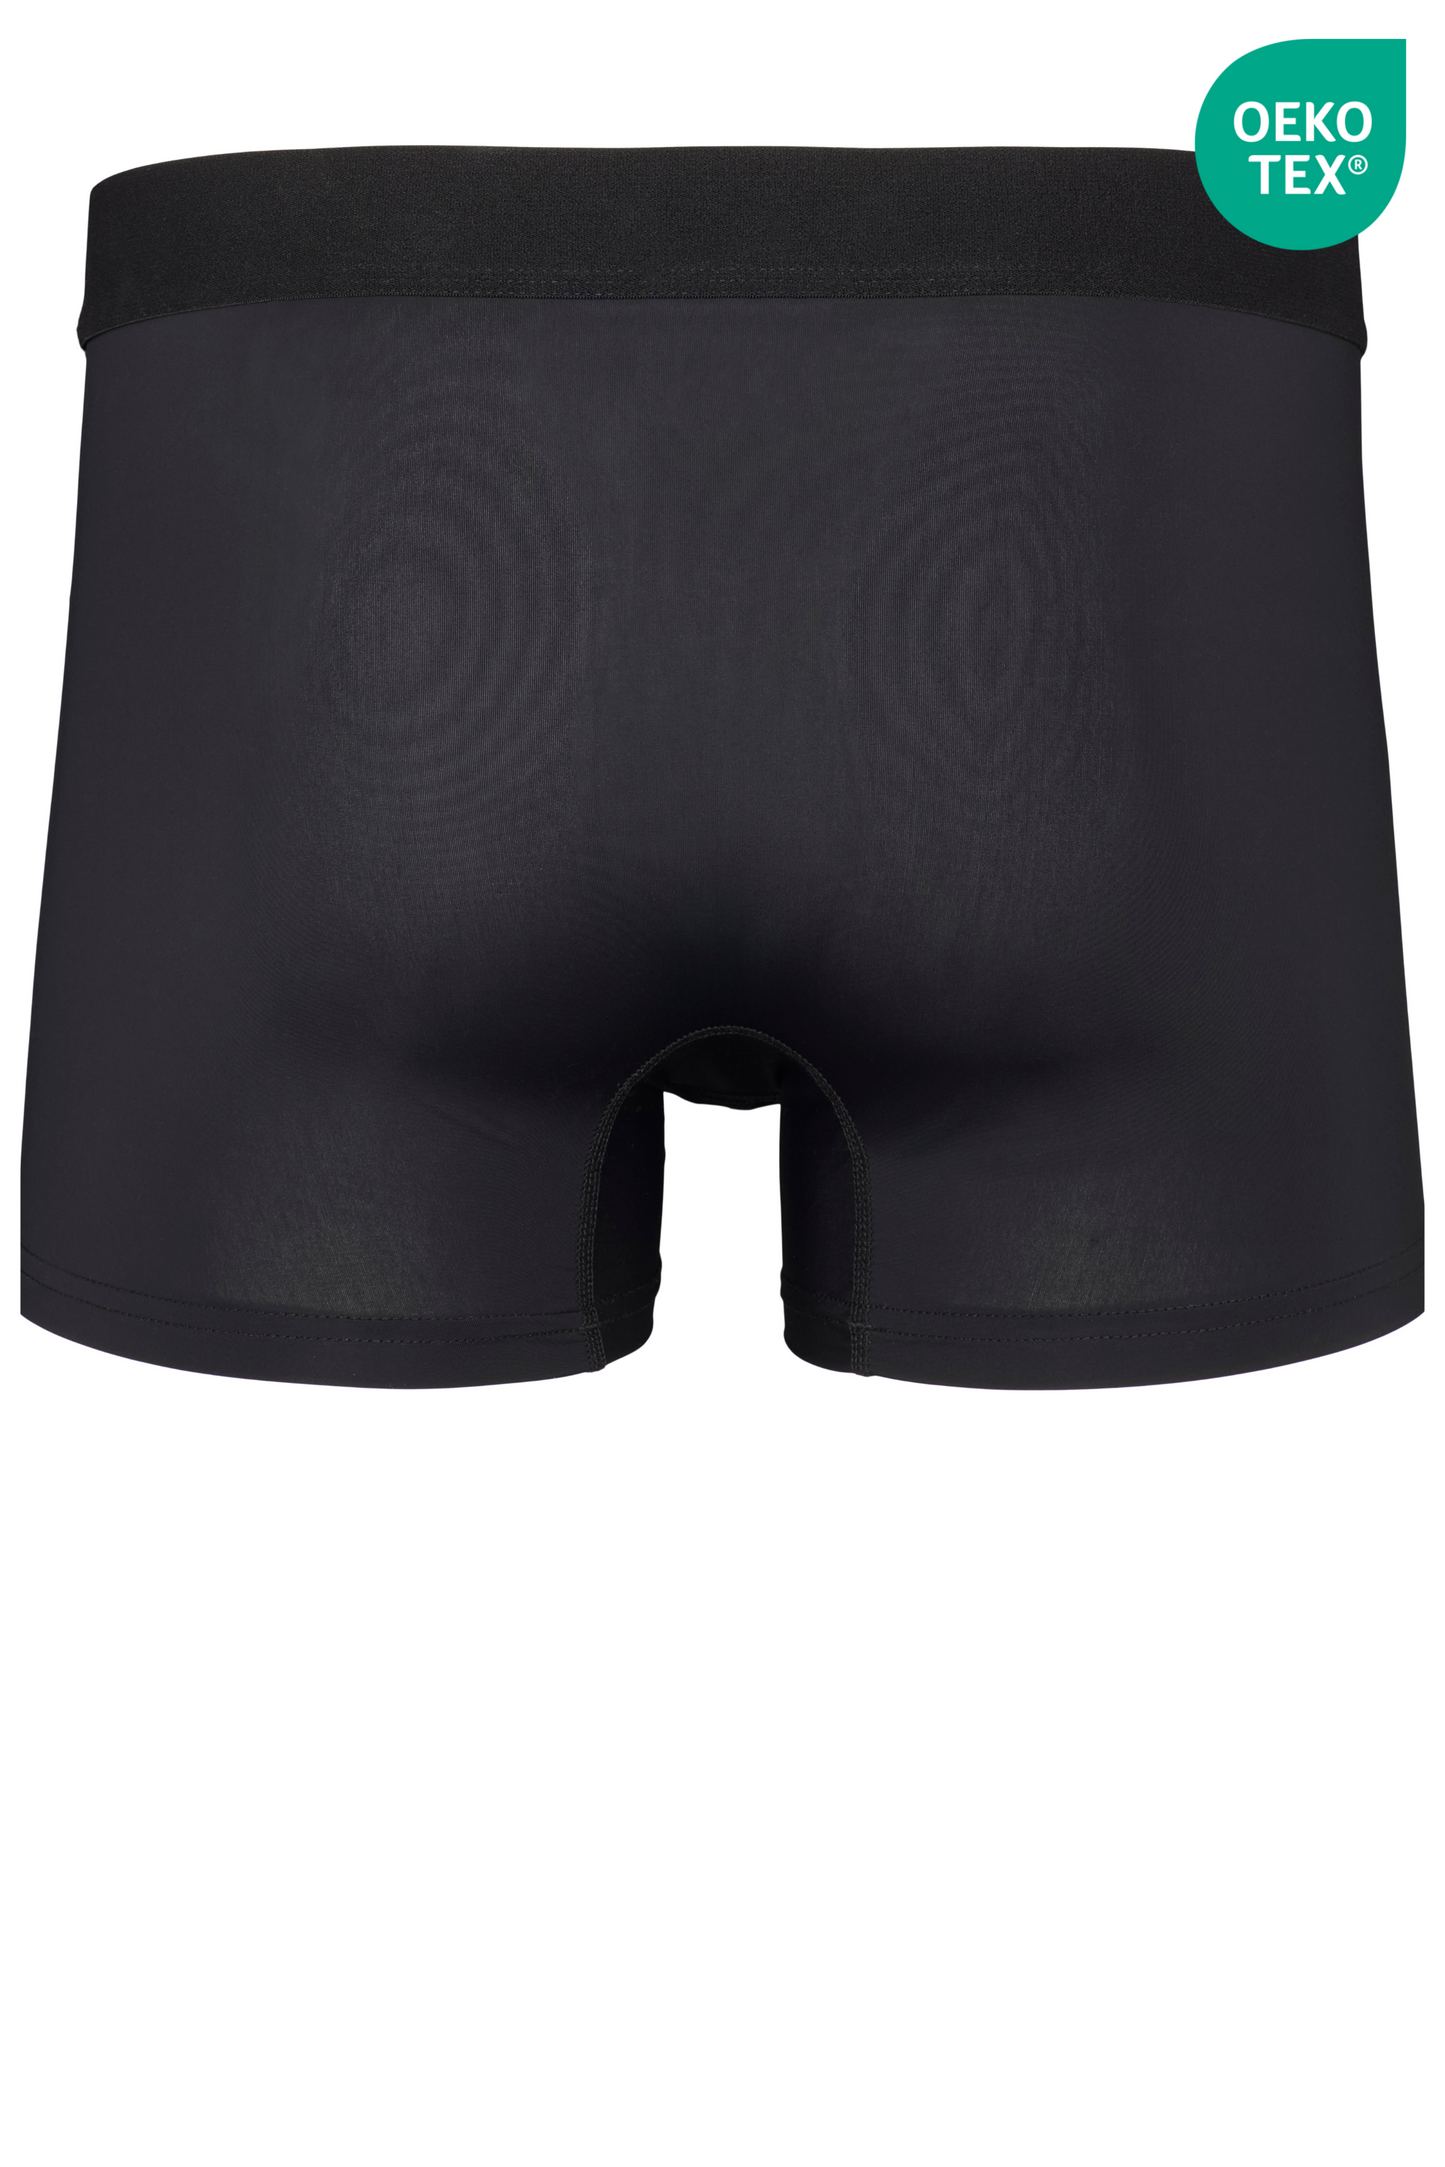 Ultra light Boxers - urinary incontinence boxer shorts